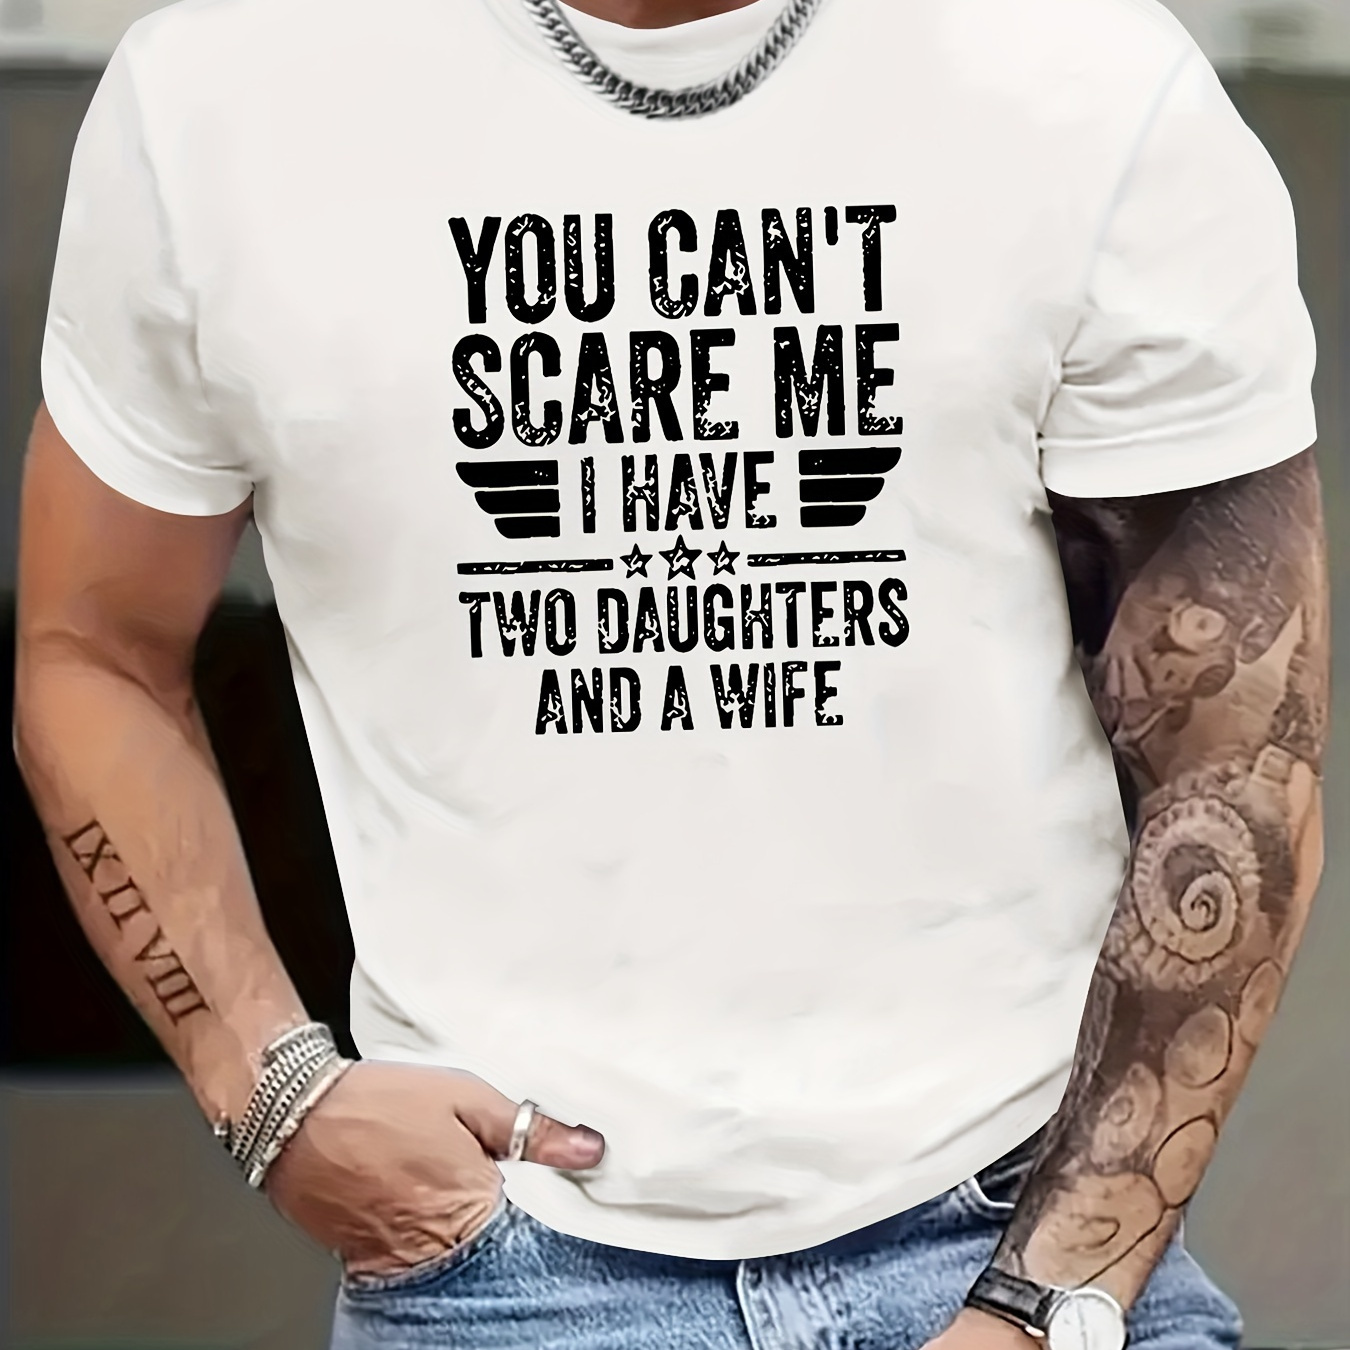 

I Have 2 Daughters And A Wife Print T Shirt, Tees For Men, Casual Short Sleeve T-shirt For Summer